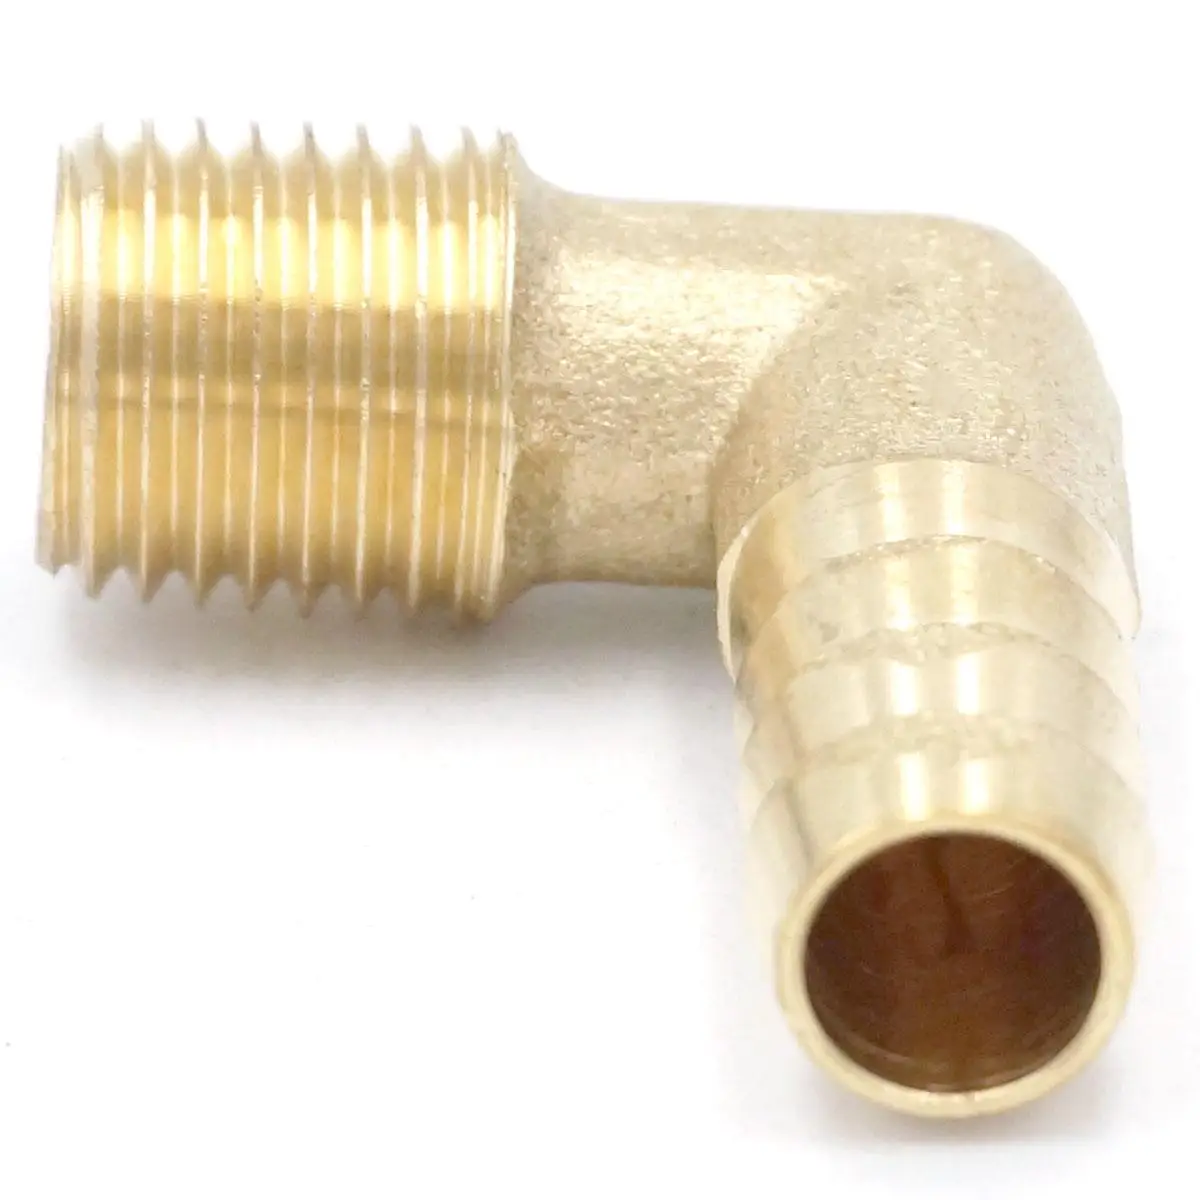 1/8" 1/4" 3/8" NPT Male x Hose Barb Tail Brass Fuel Fitting Connector Adapter 